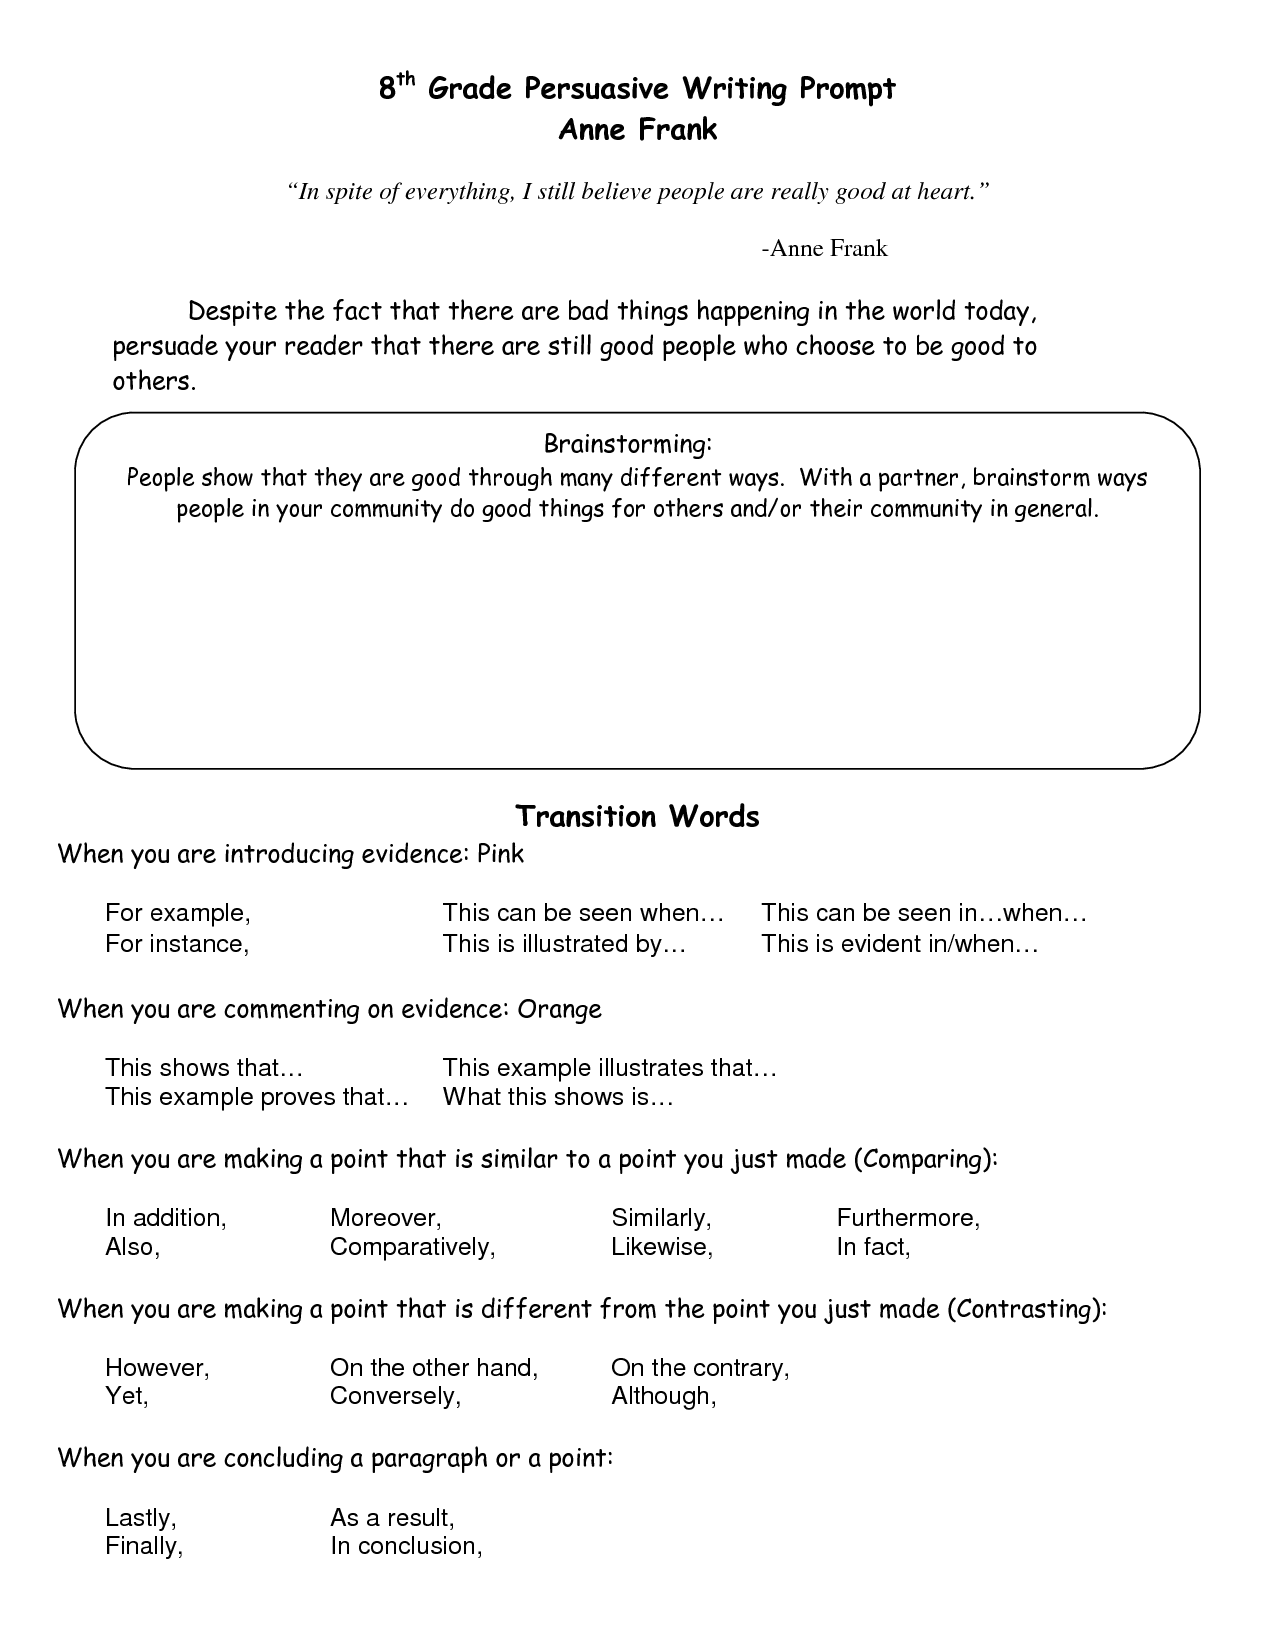 19-best-images-of-8th-grade-history-worksheets-8th-grade-social-studies-worksheets-8th-grade